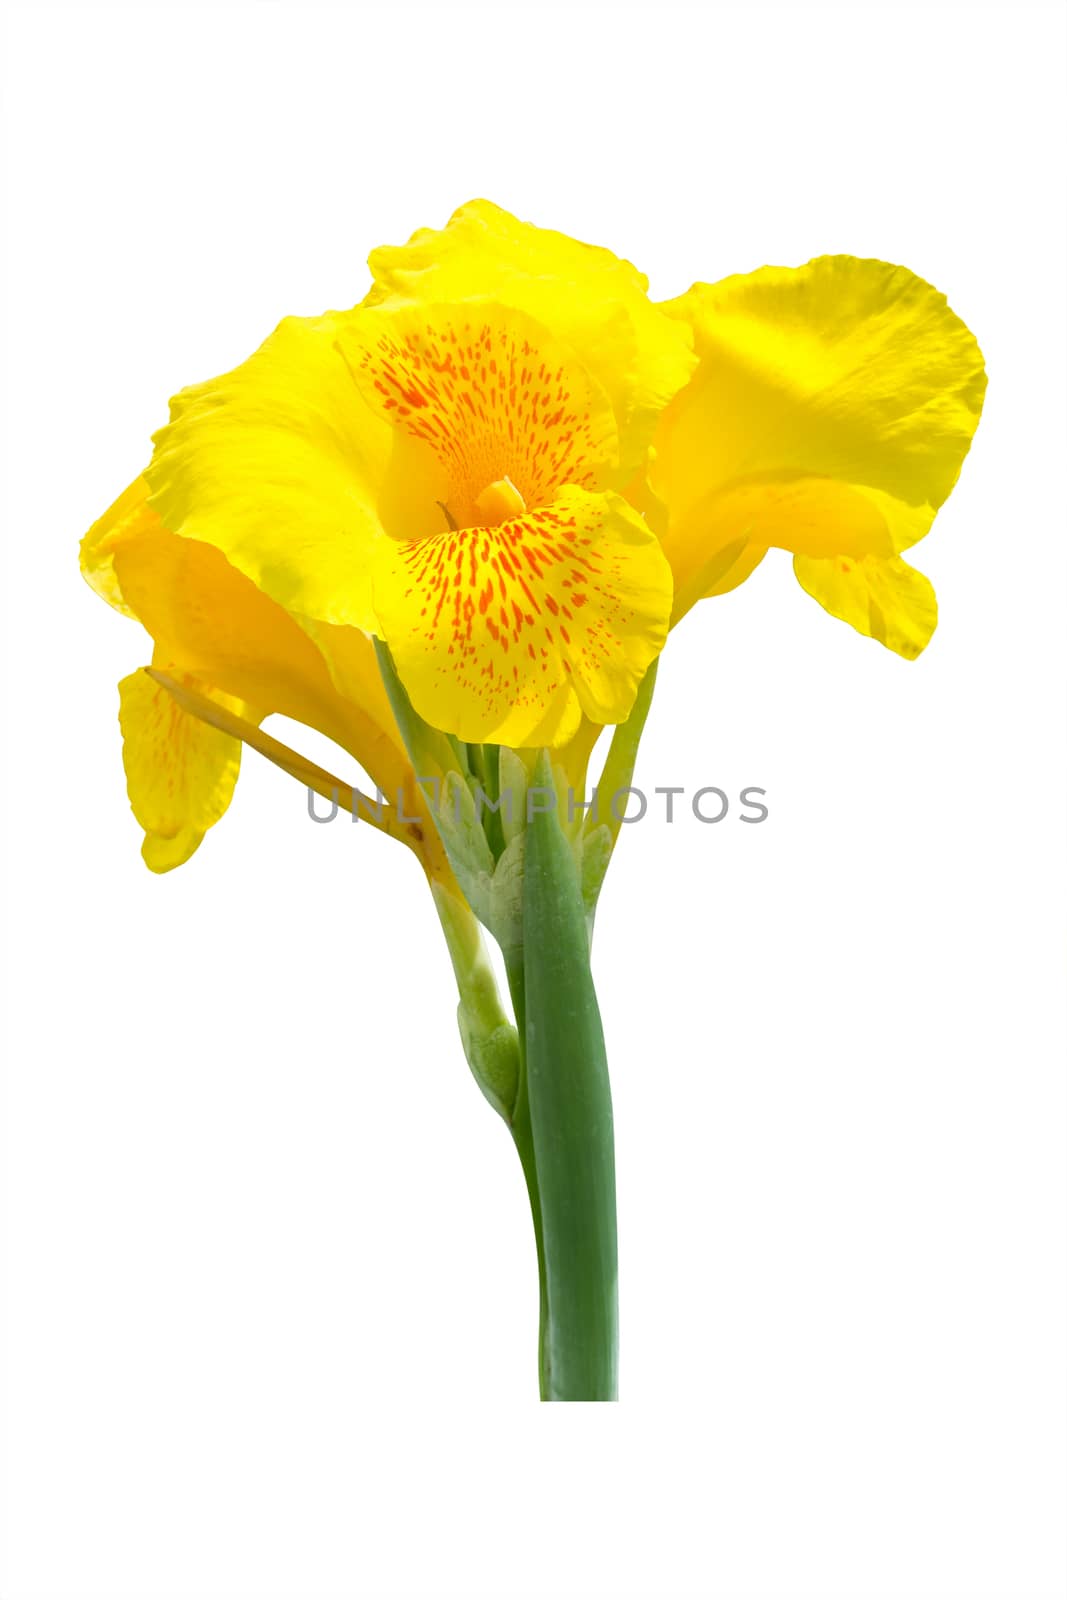 Yellow canna lily flowers on white background. Clipping path